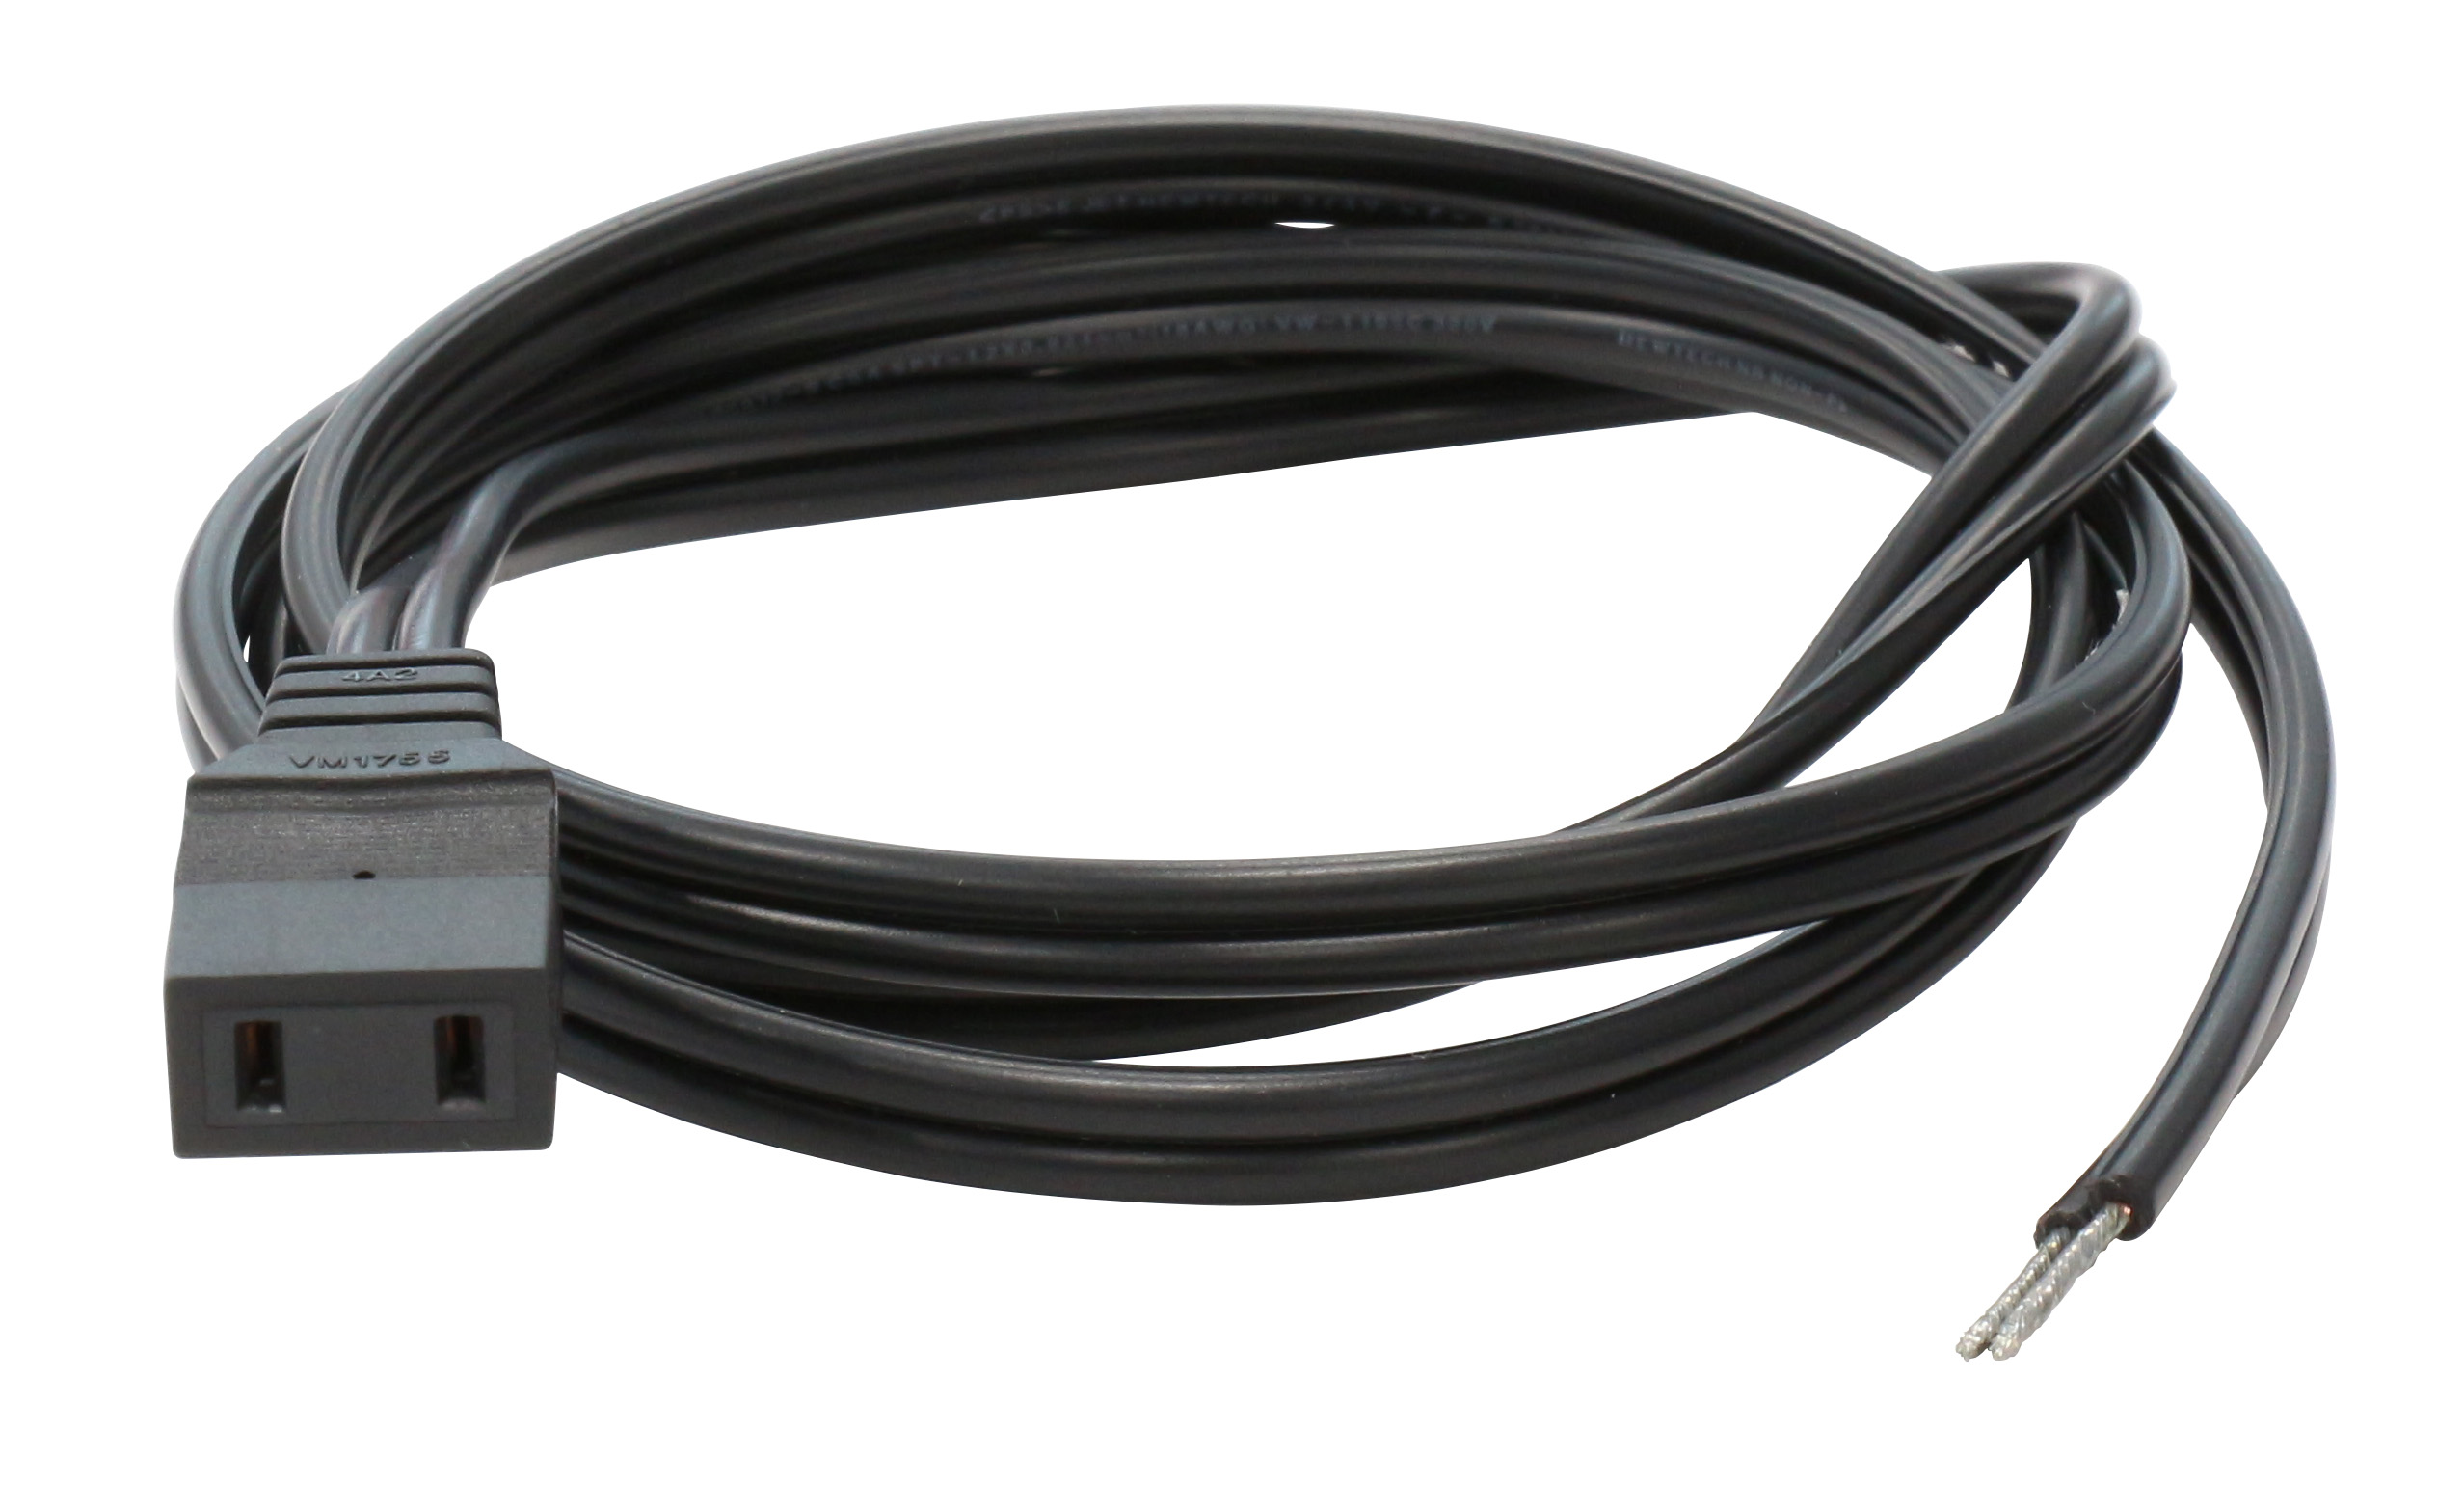 Plug Cord for 160 mm x 160 mm - 51 mm Thick AC Fan